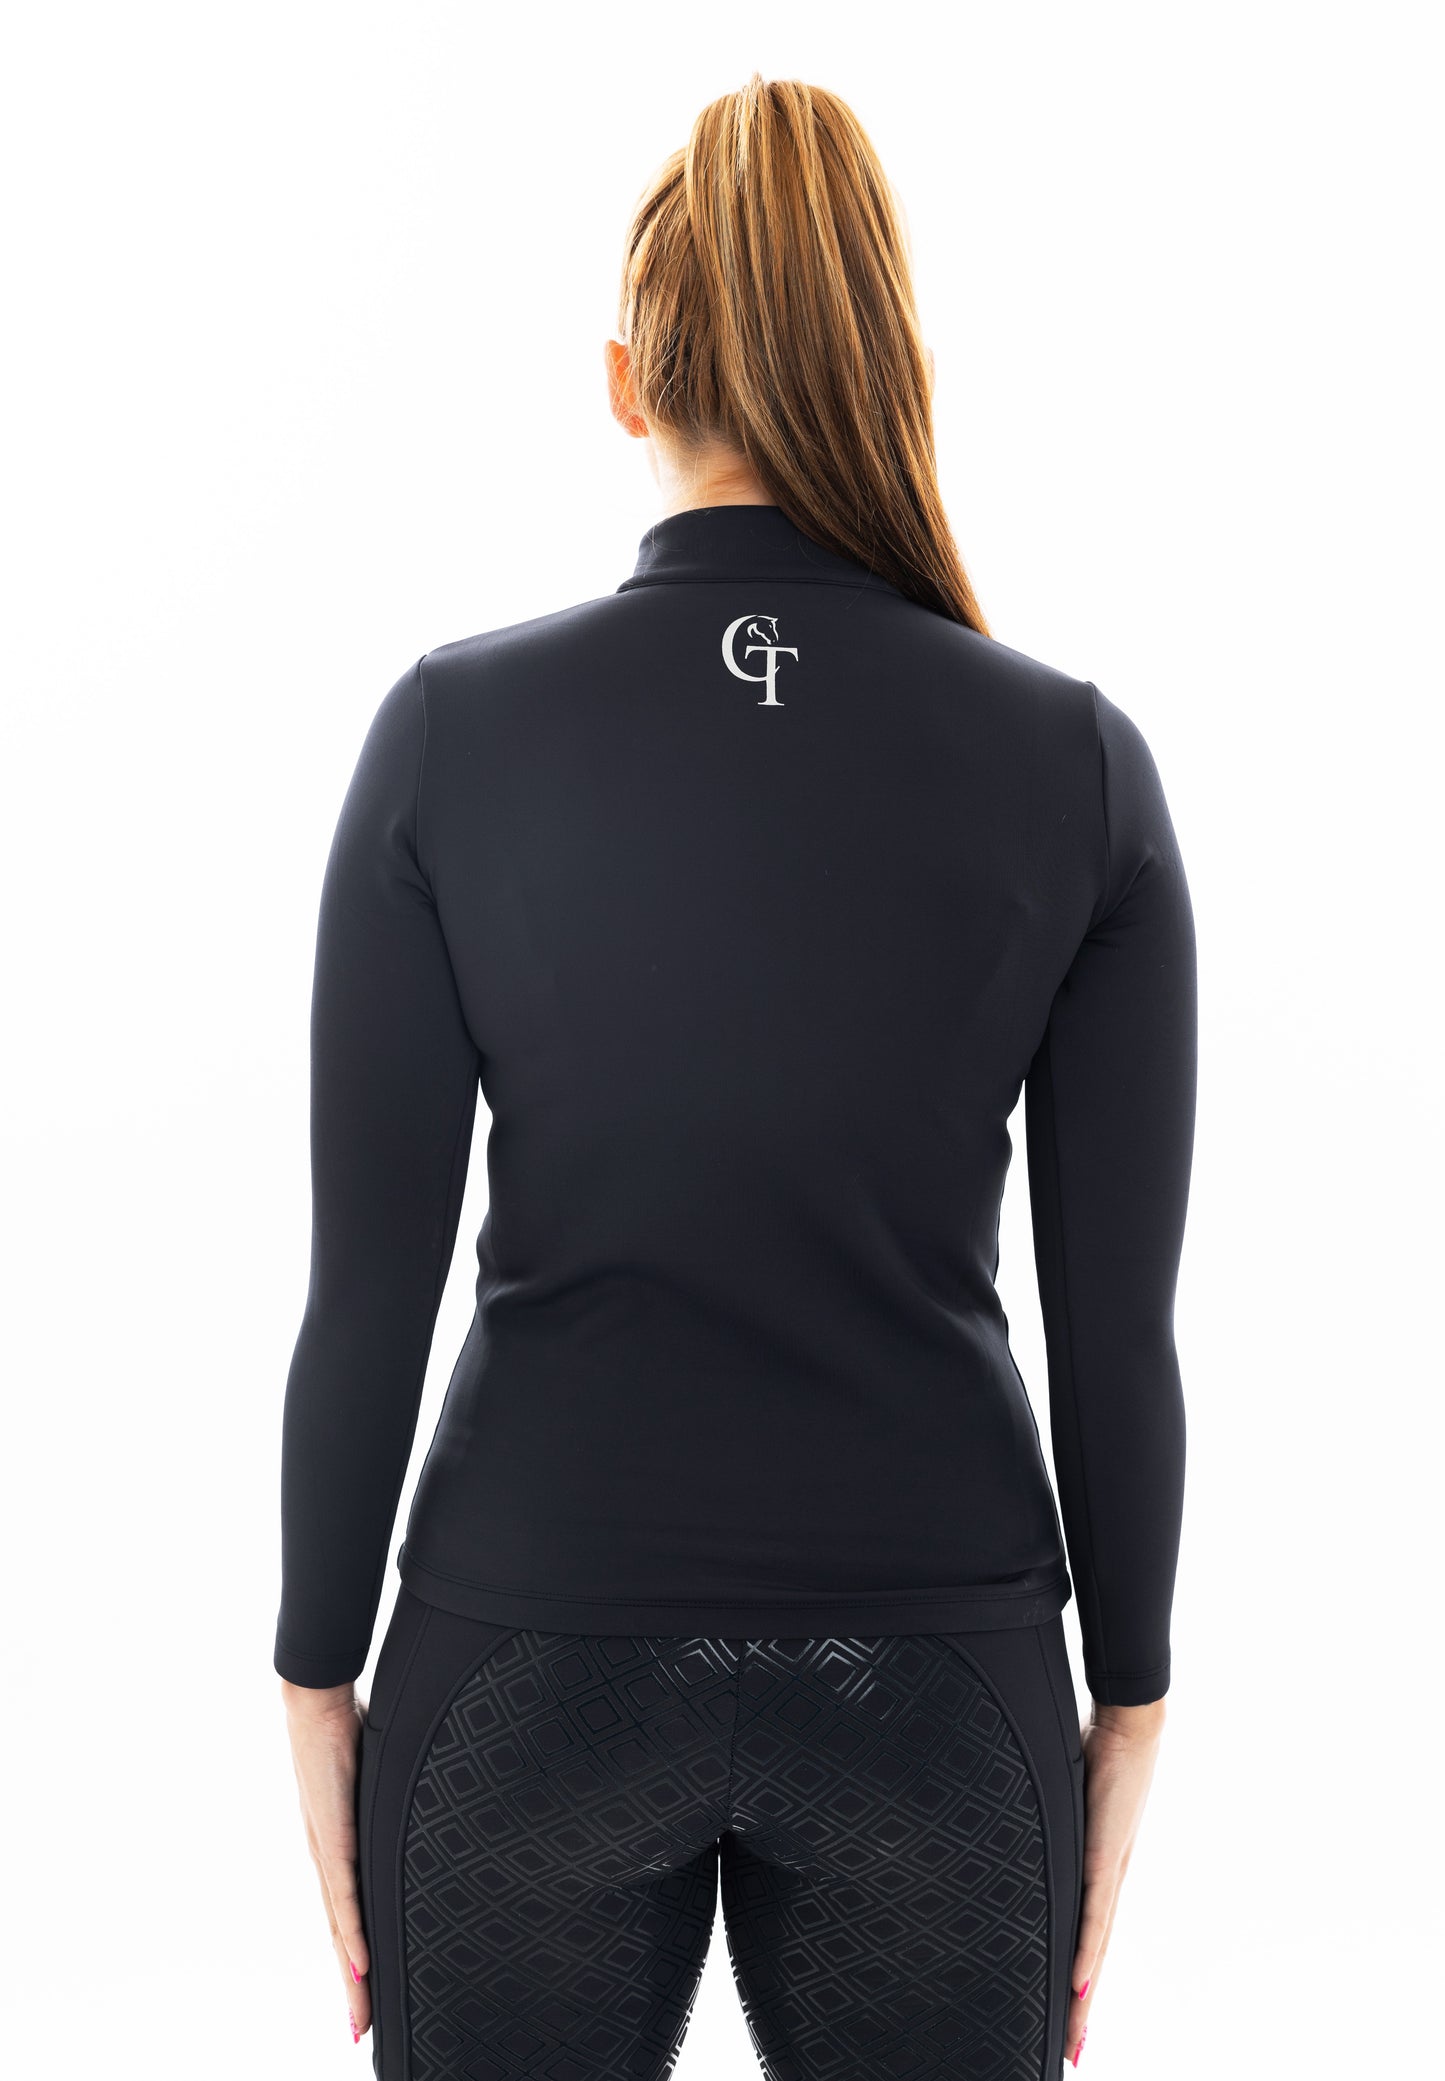 
                  
                    Young Rider / Winter Thermal Horse Riding Base Layer - Black
                  
                